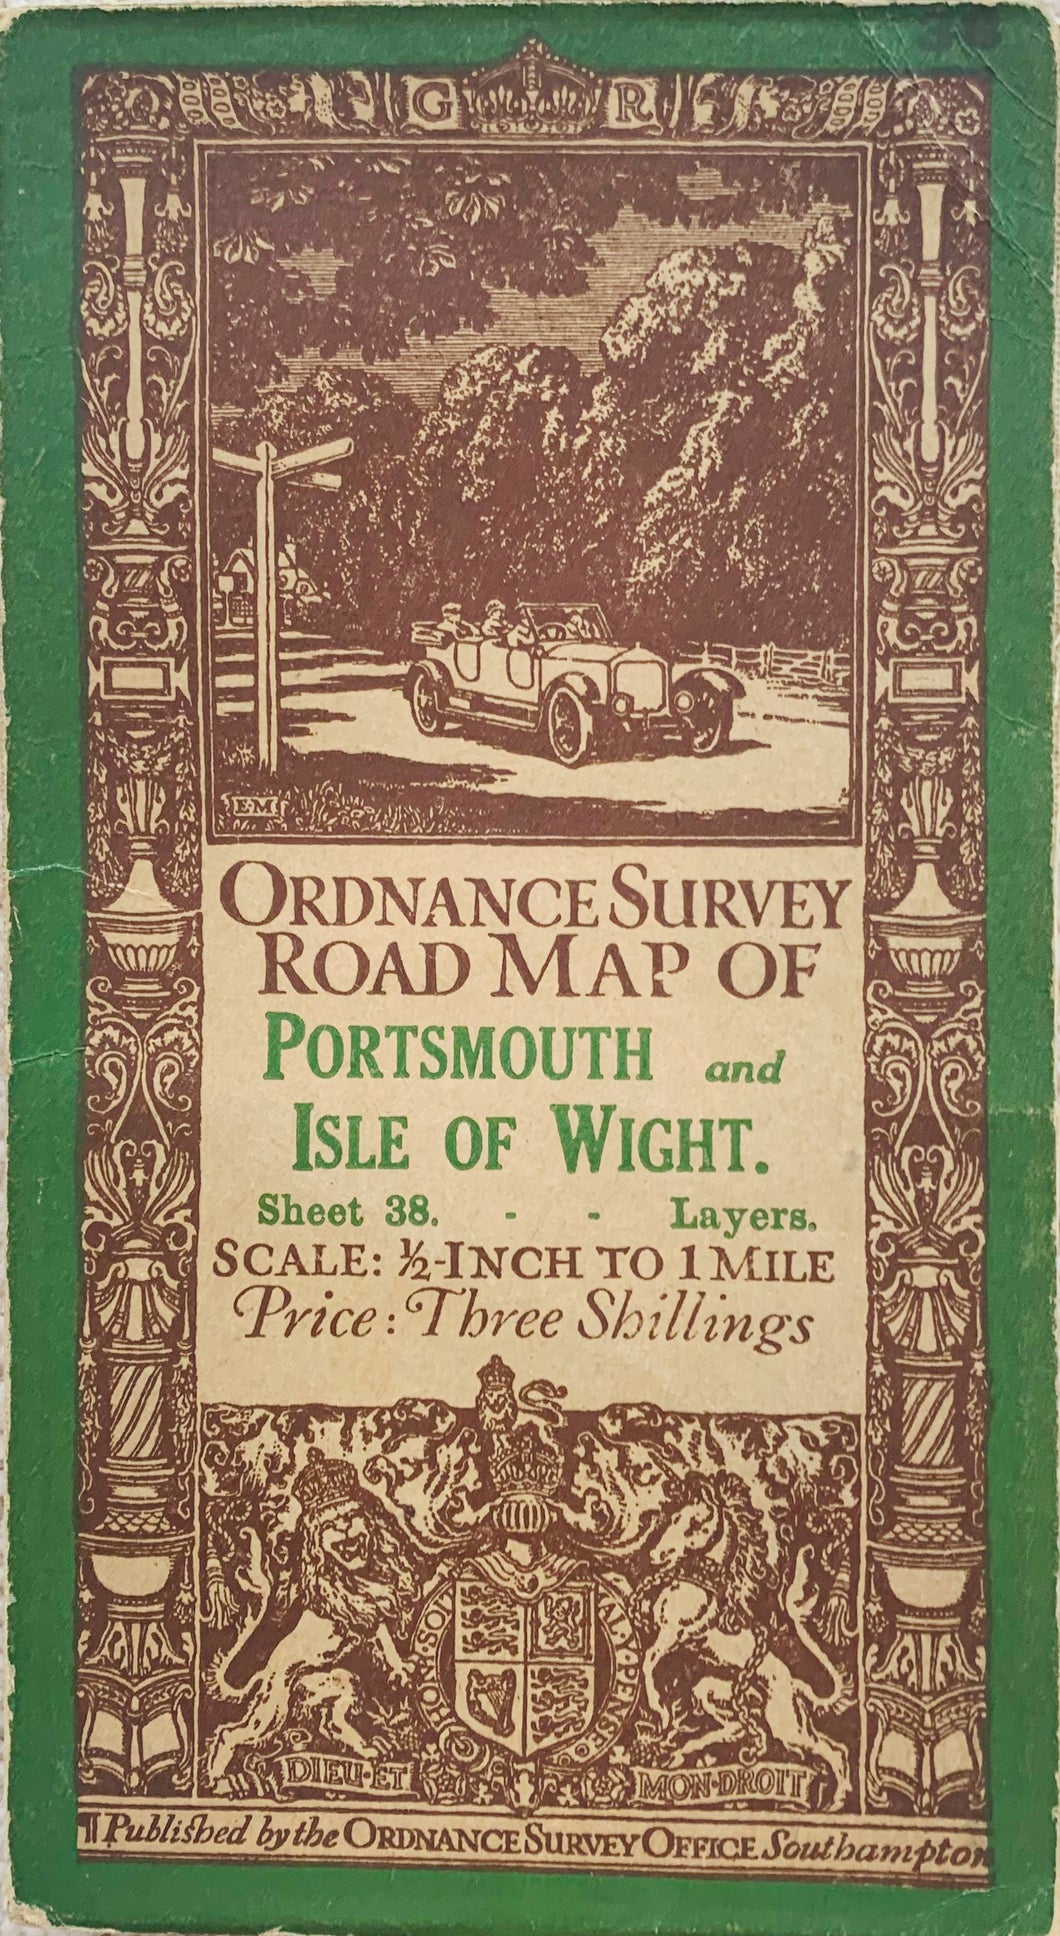 Ordnance Survey Road Map of the Isle of Wight and Portsmouth Published in 1914